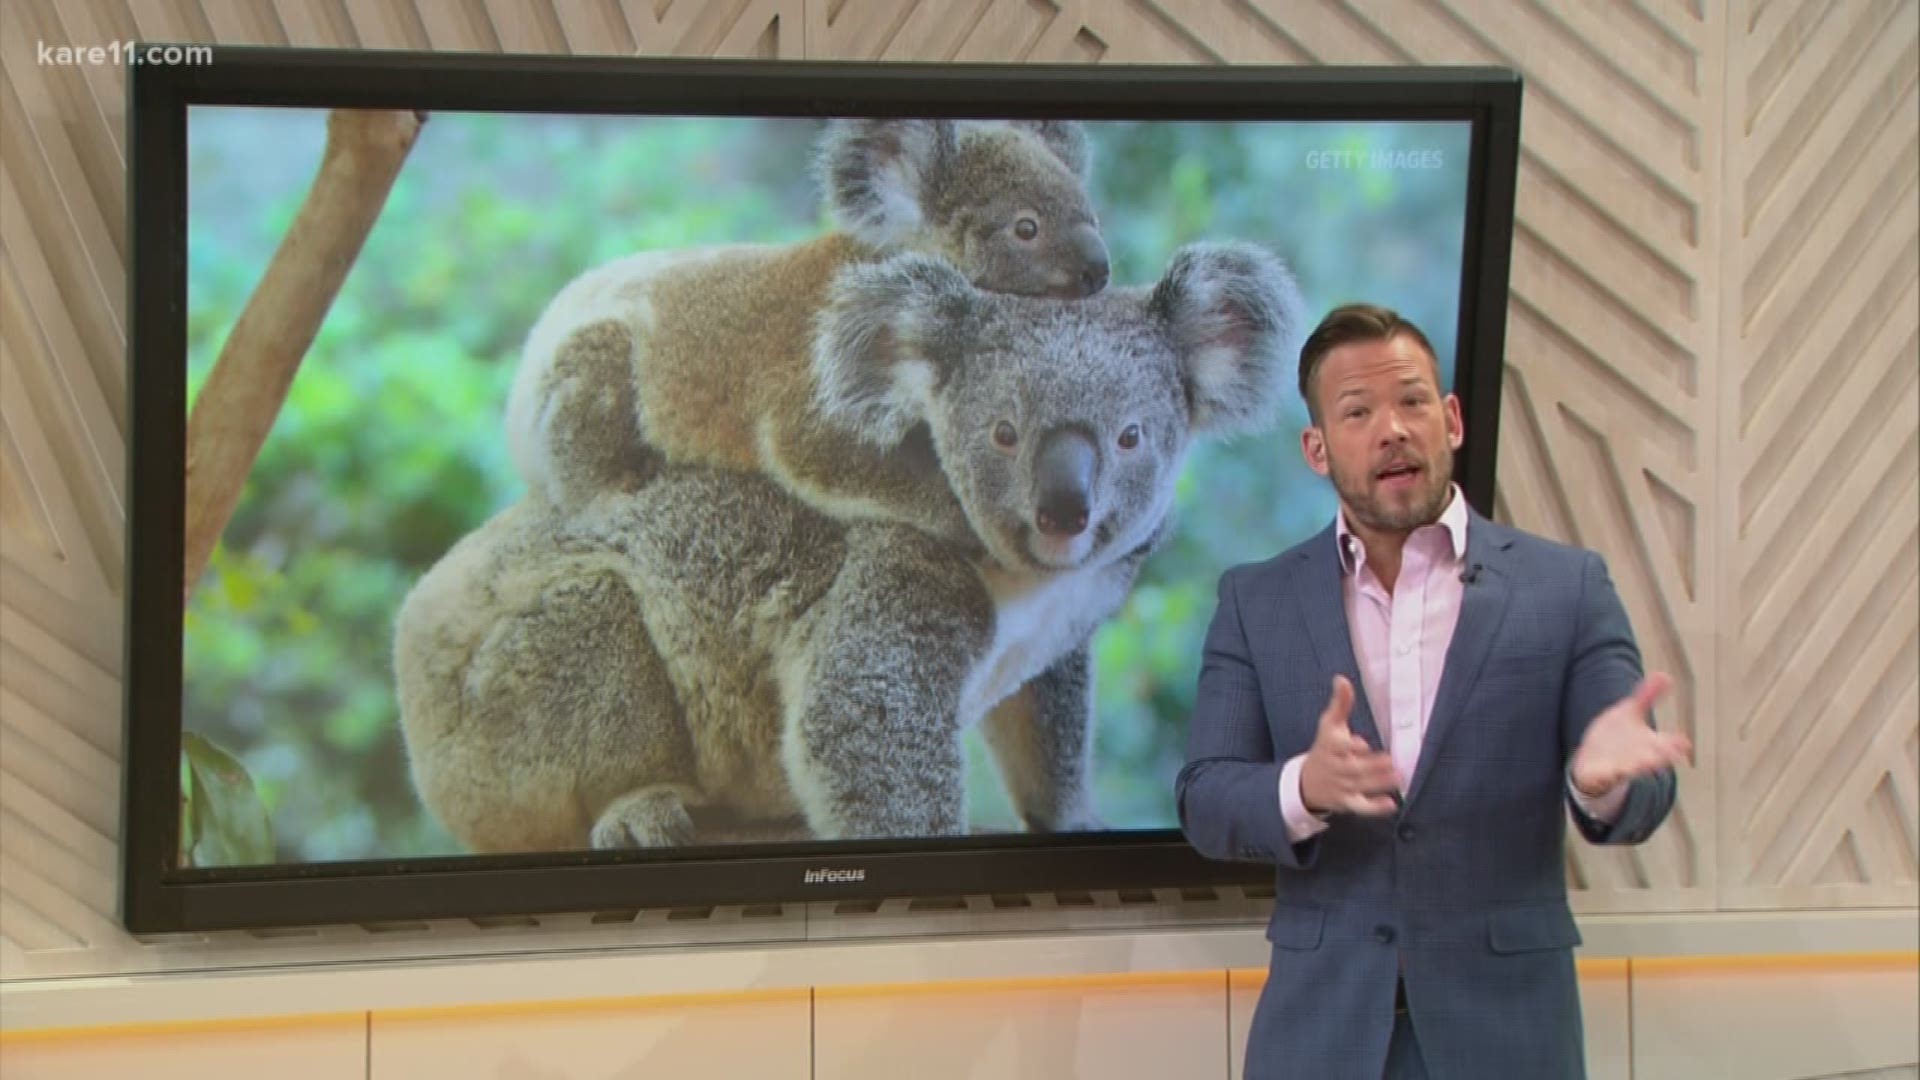 Sven explains what groups are doing to protect koala bears, which are 'functionally extinct.'